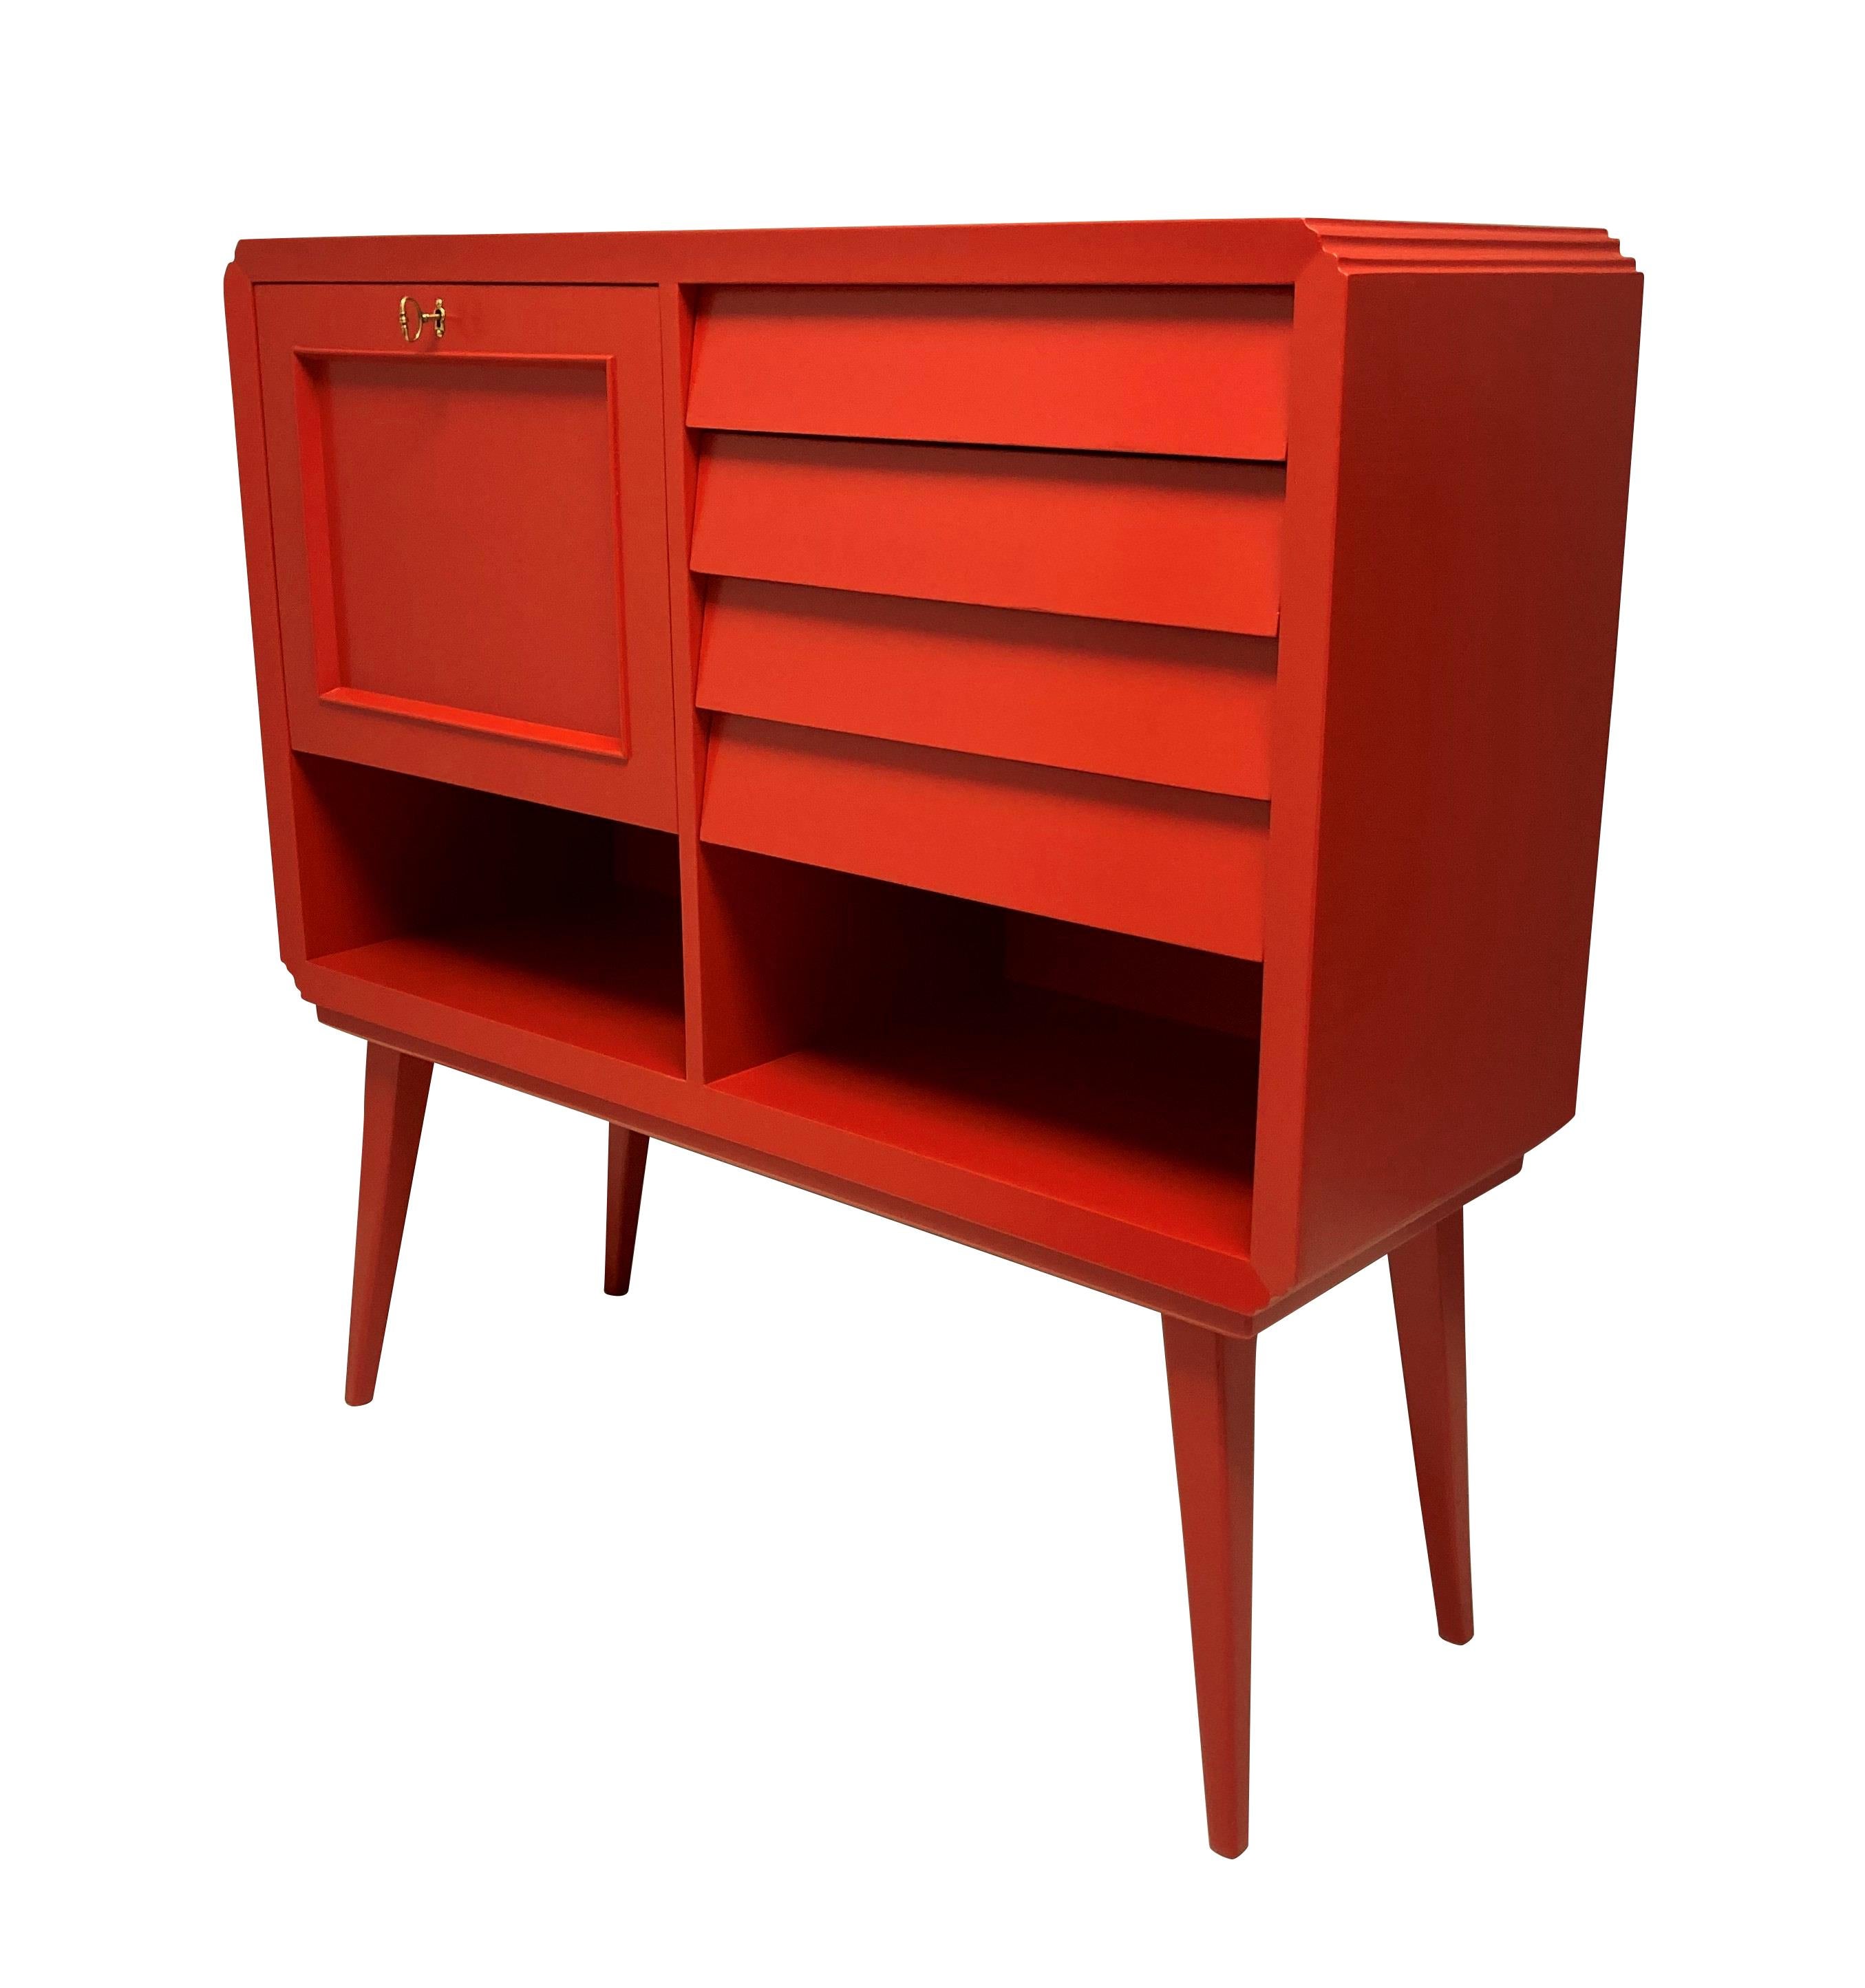 A striking Italian Mid-Century scarlet lacquered bar cabinet, with four angled drawers, two lower compartments and the bar, mirrored inside with a glass shelf.